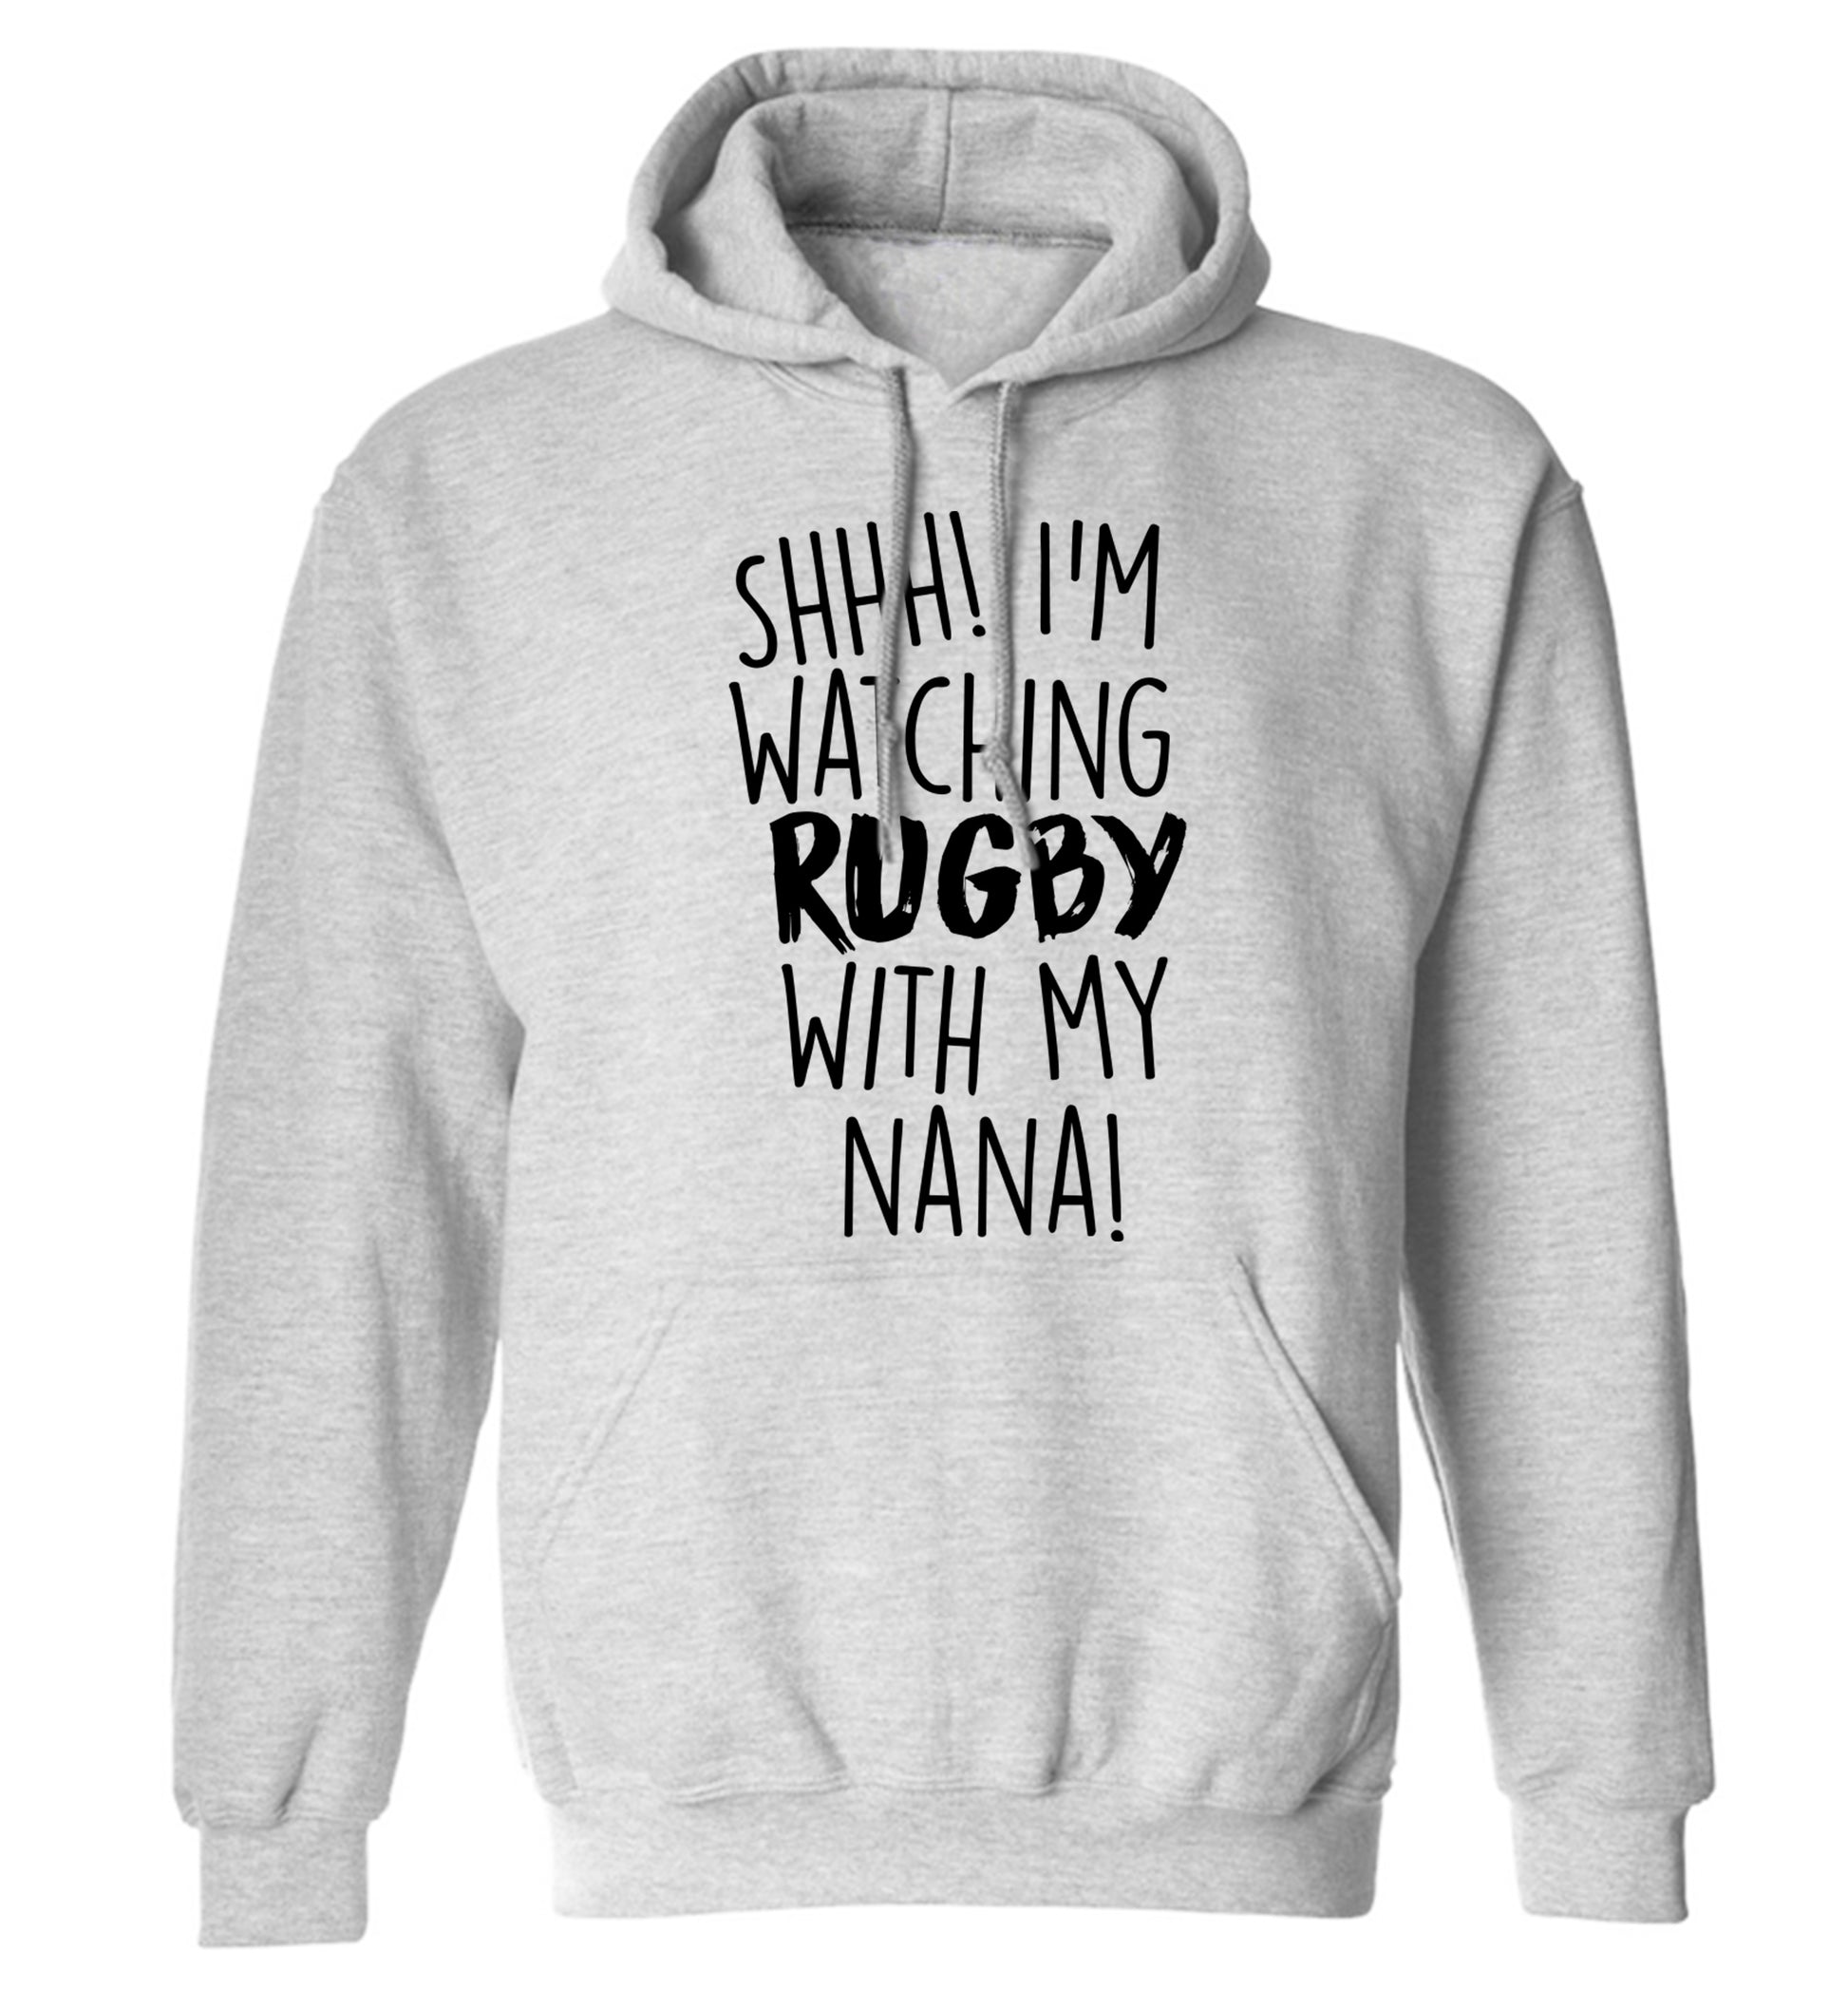 Shh I'm watching rugby with my nana adults unisex grey hoodie 2XL